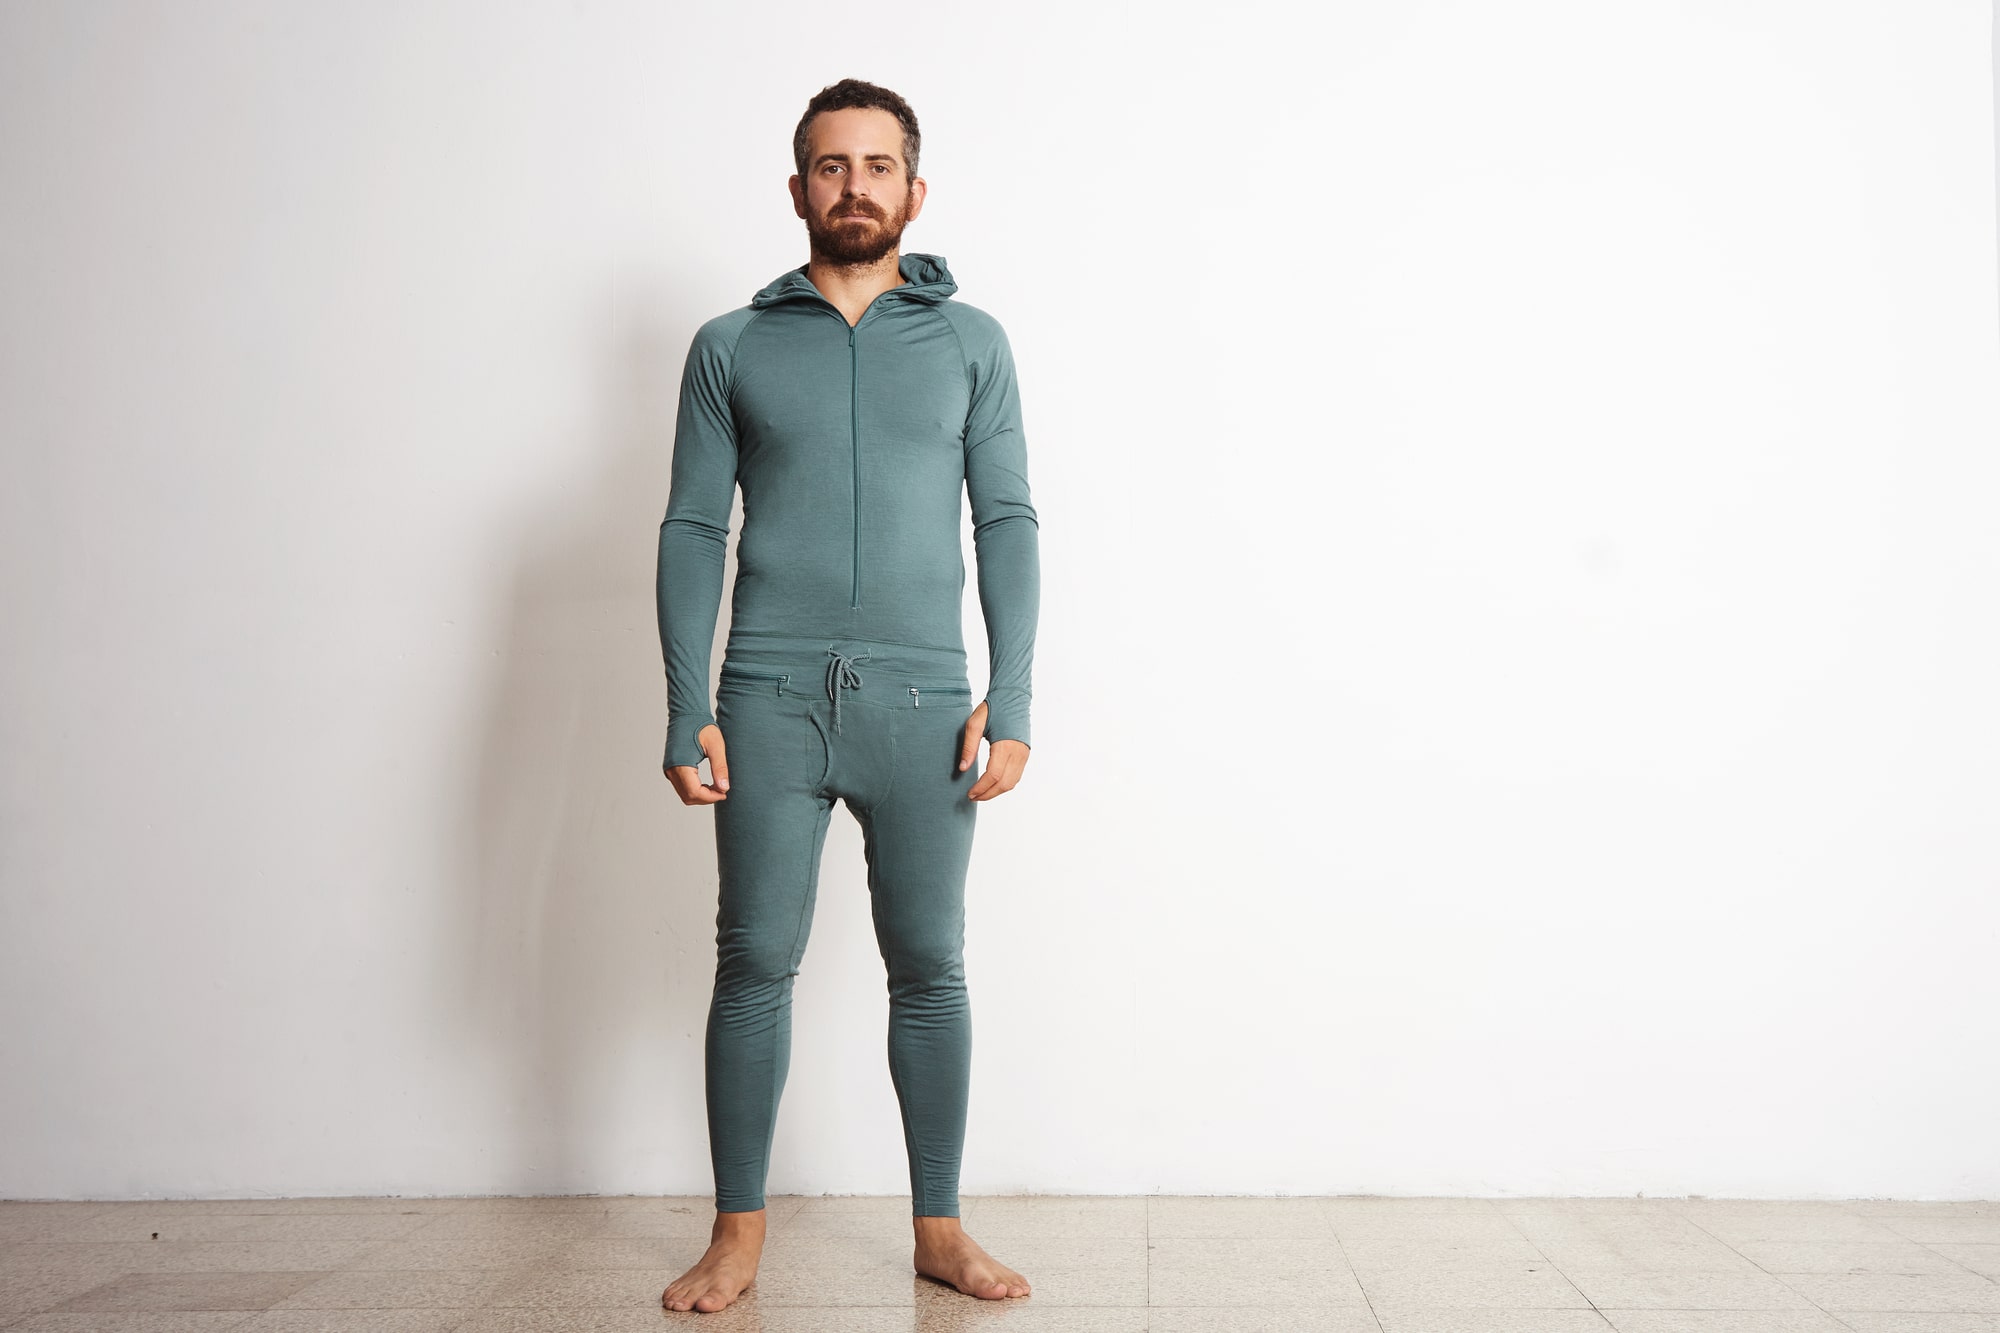 thermal base layer man in green